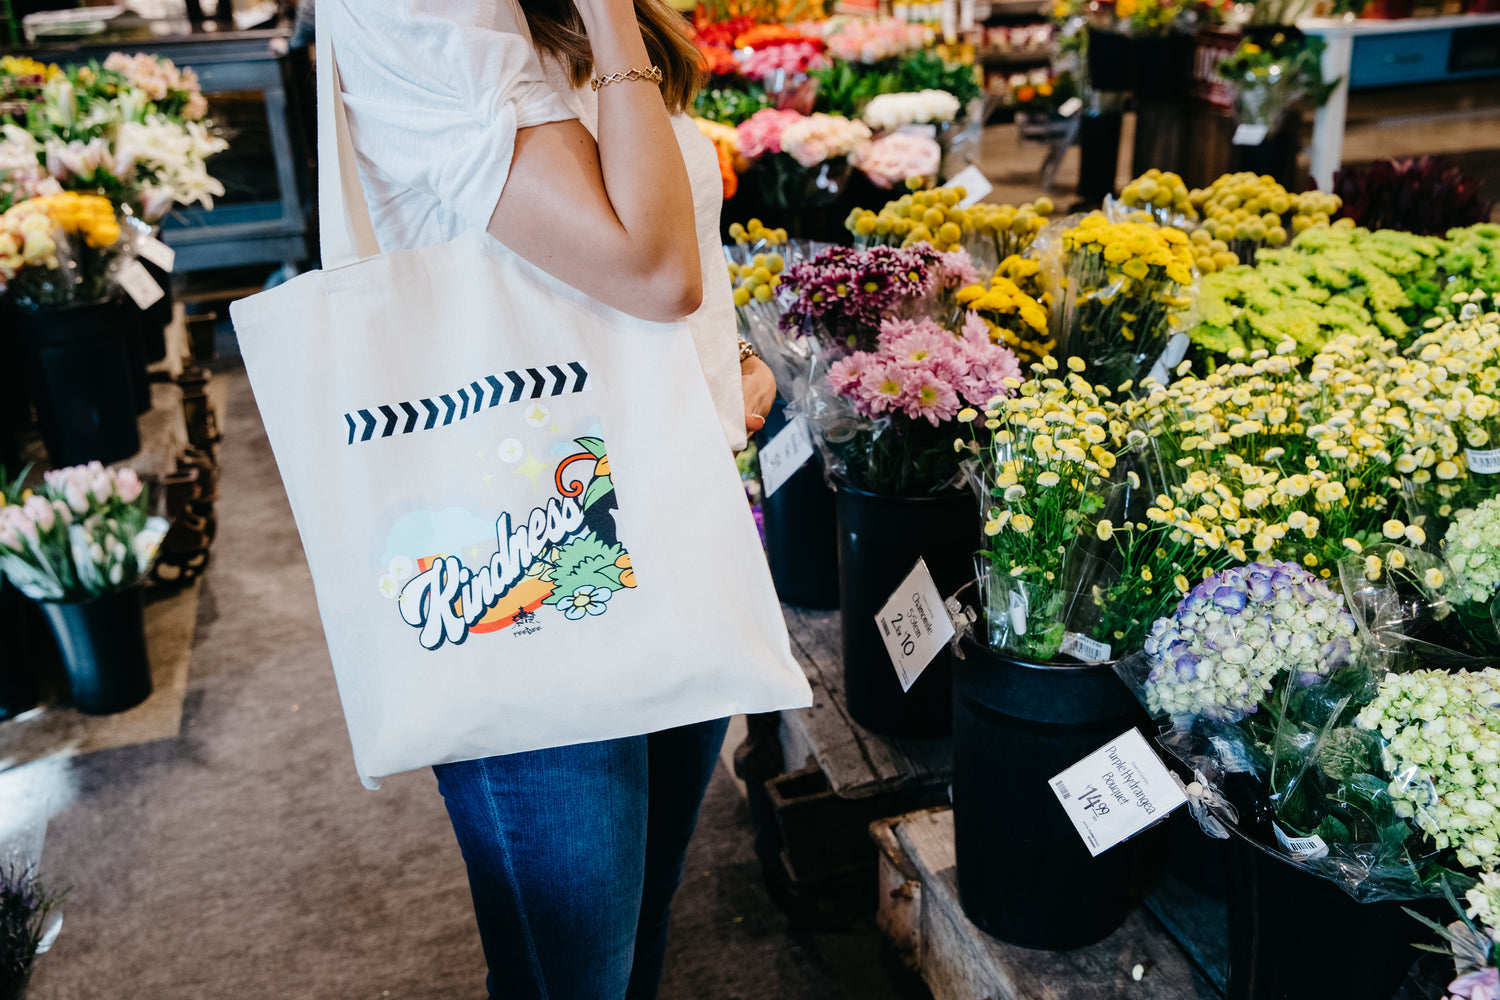 Our Kindness Tote is custom screen-printed on versatile off-white canvas, to carry your stuff with a splash of color.